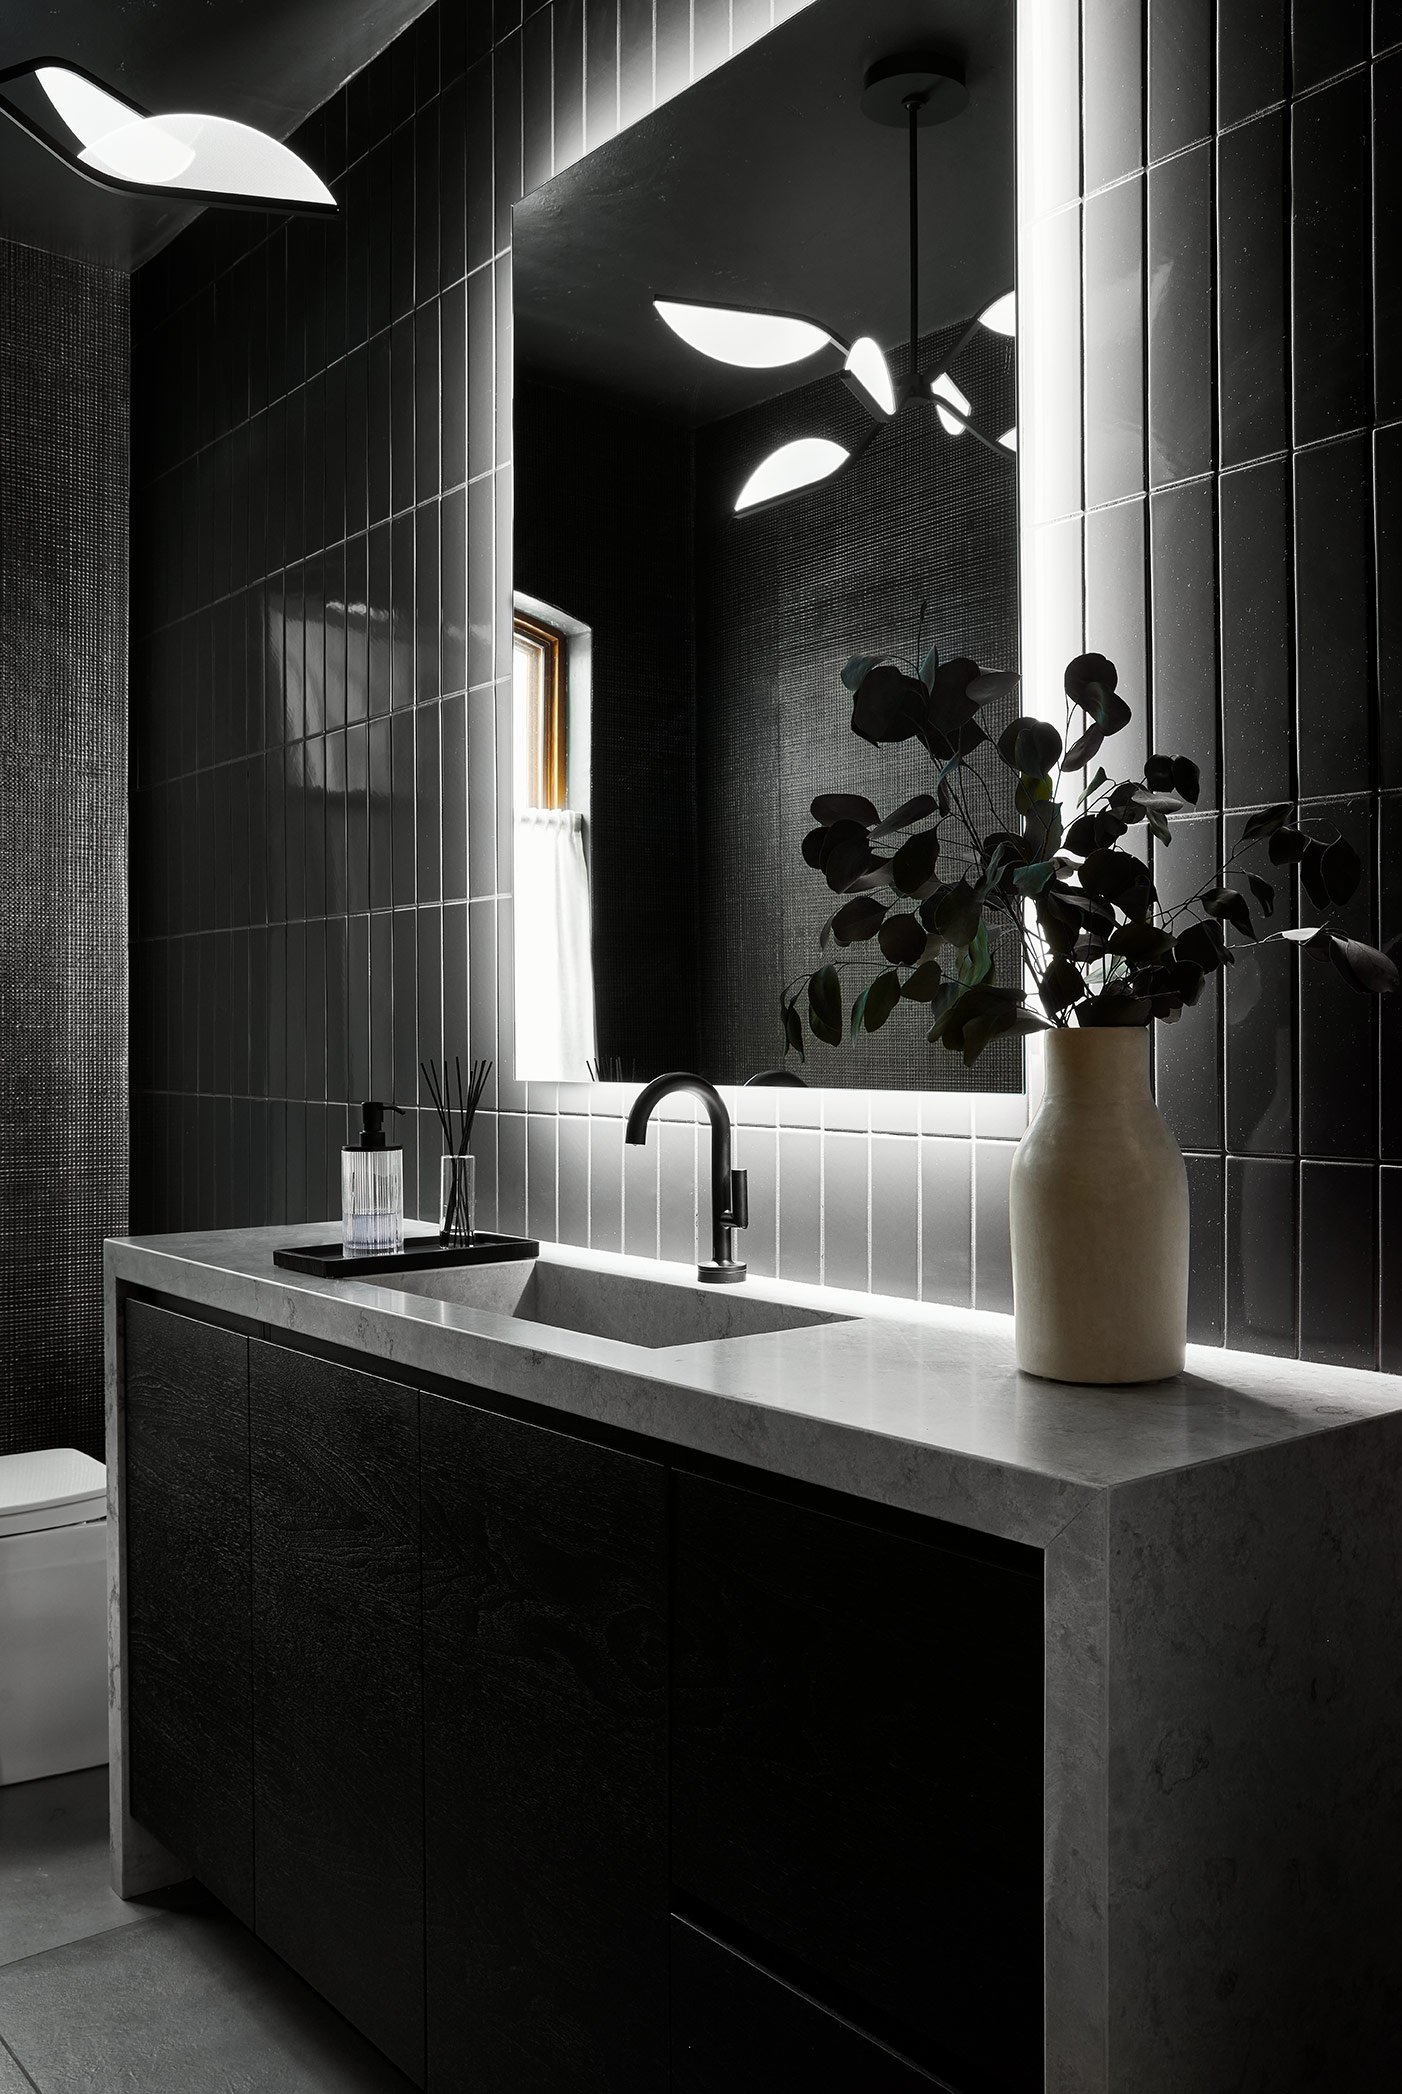 Black bathroom cabinet with gray marble countertop and exterior. Light gray floor tiles and backlit mirror.